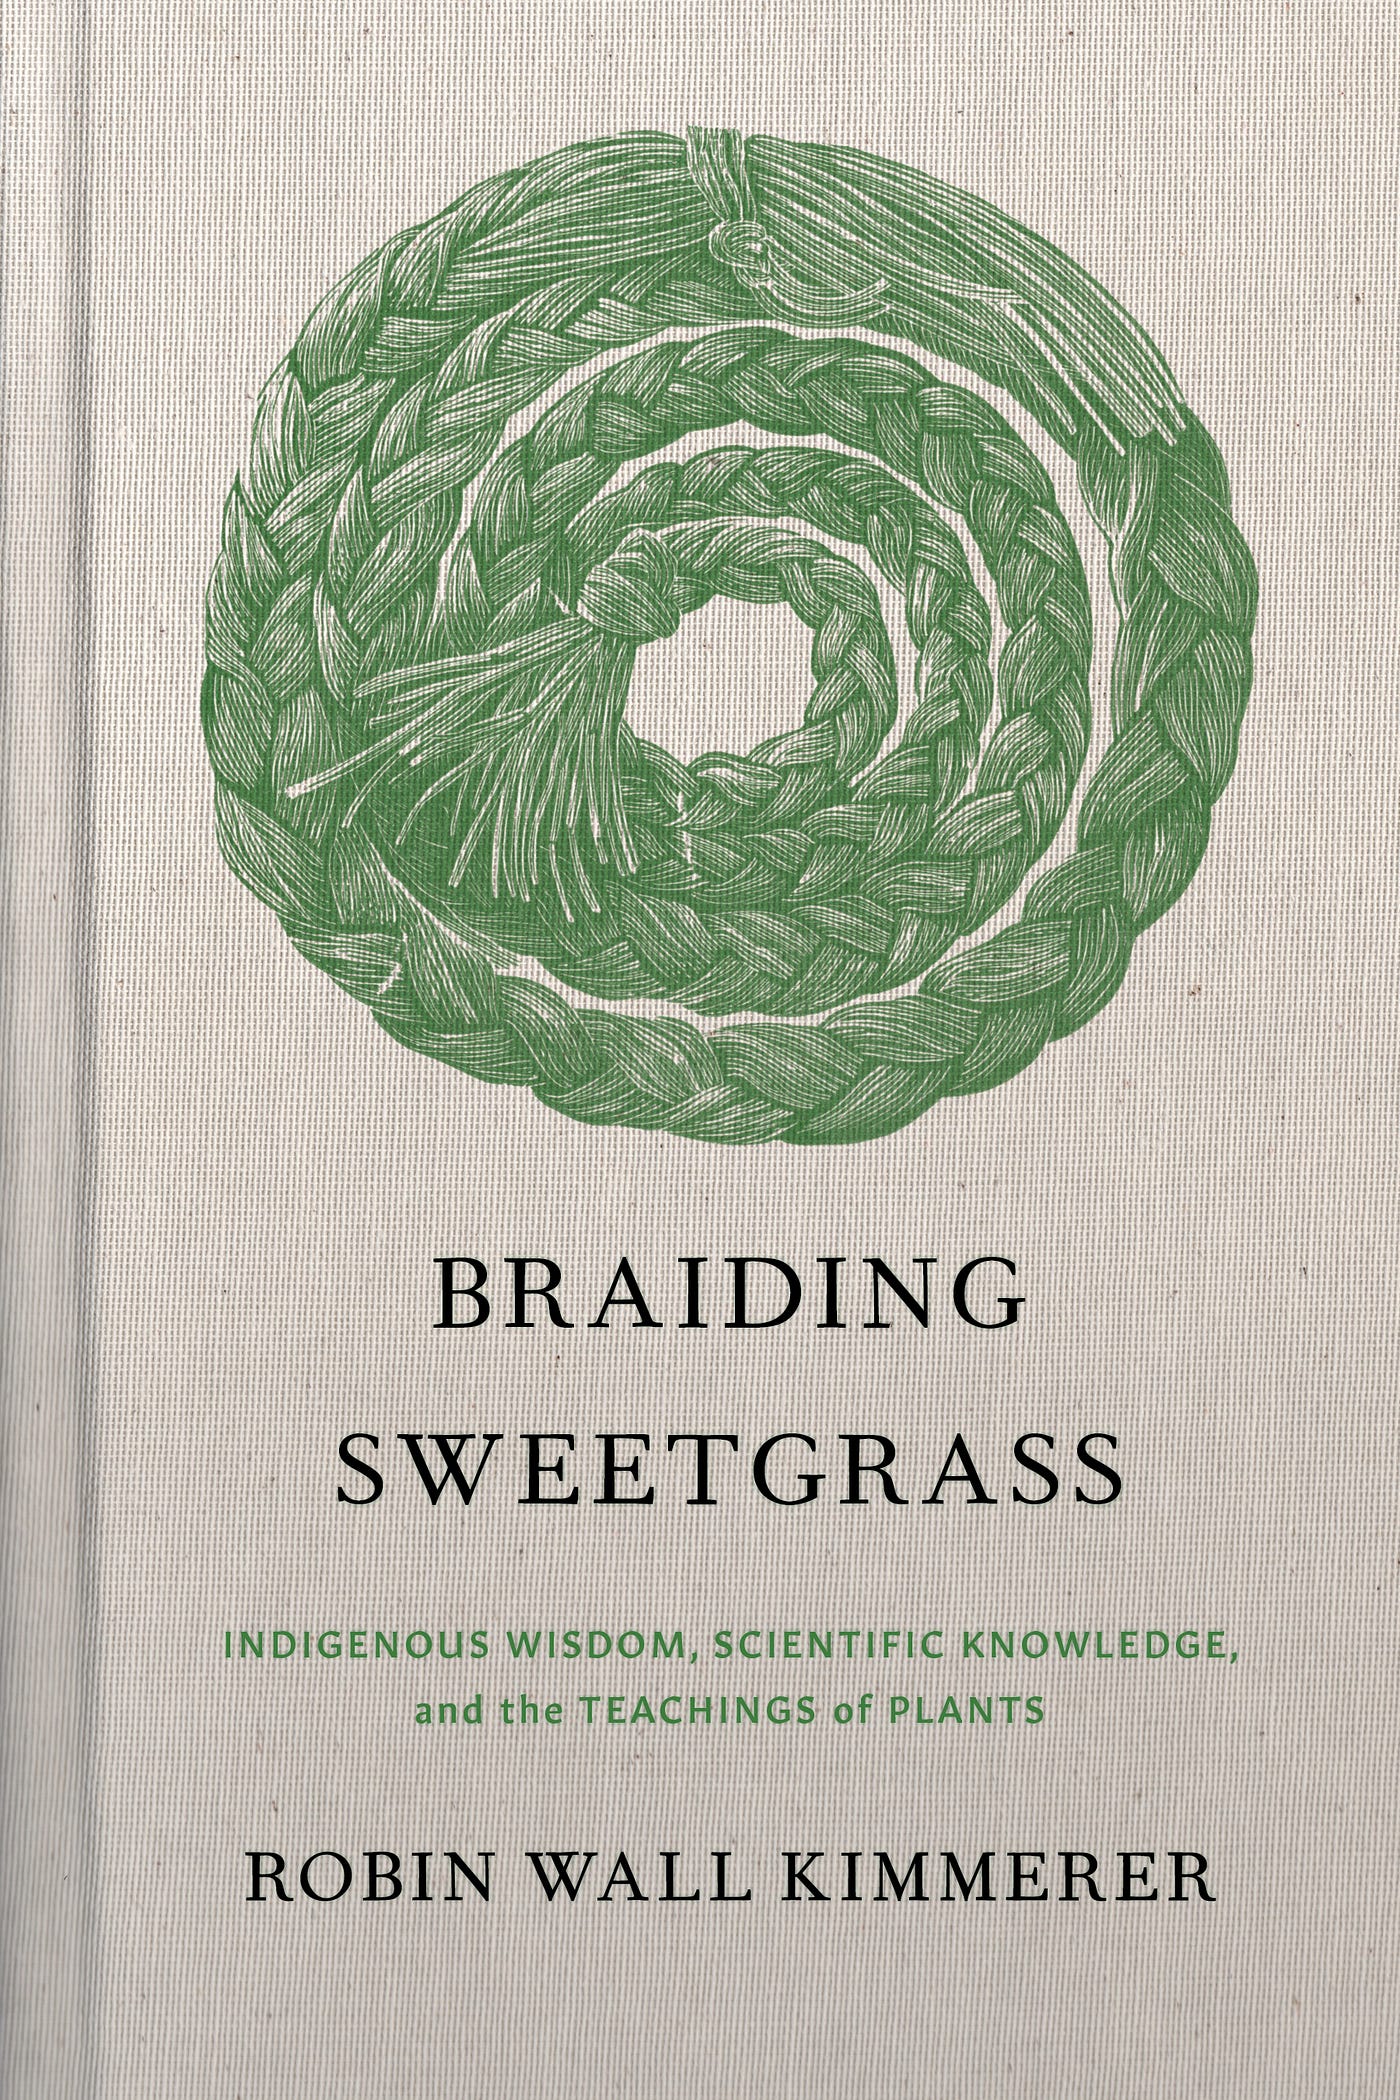 Simple Ways to Identify Sweetgrass: 10 Steps (with Pictures)